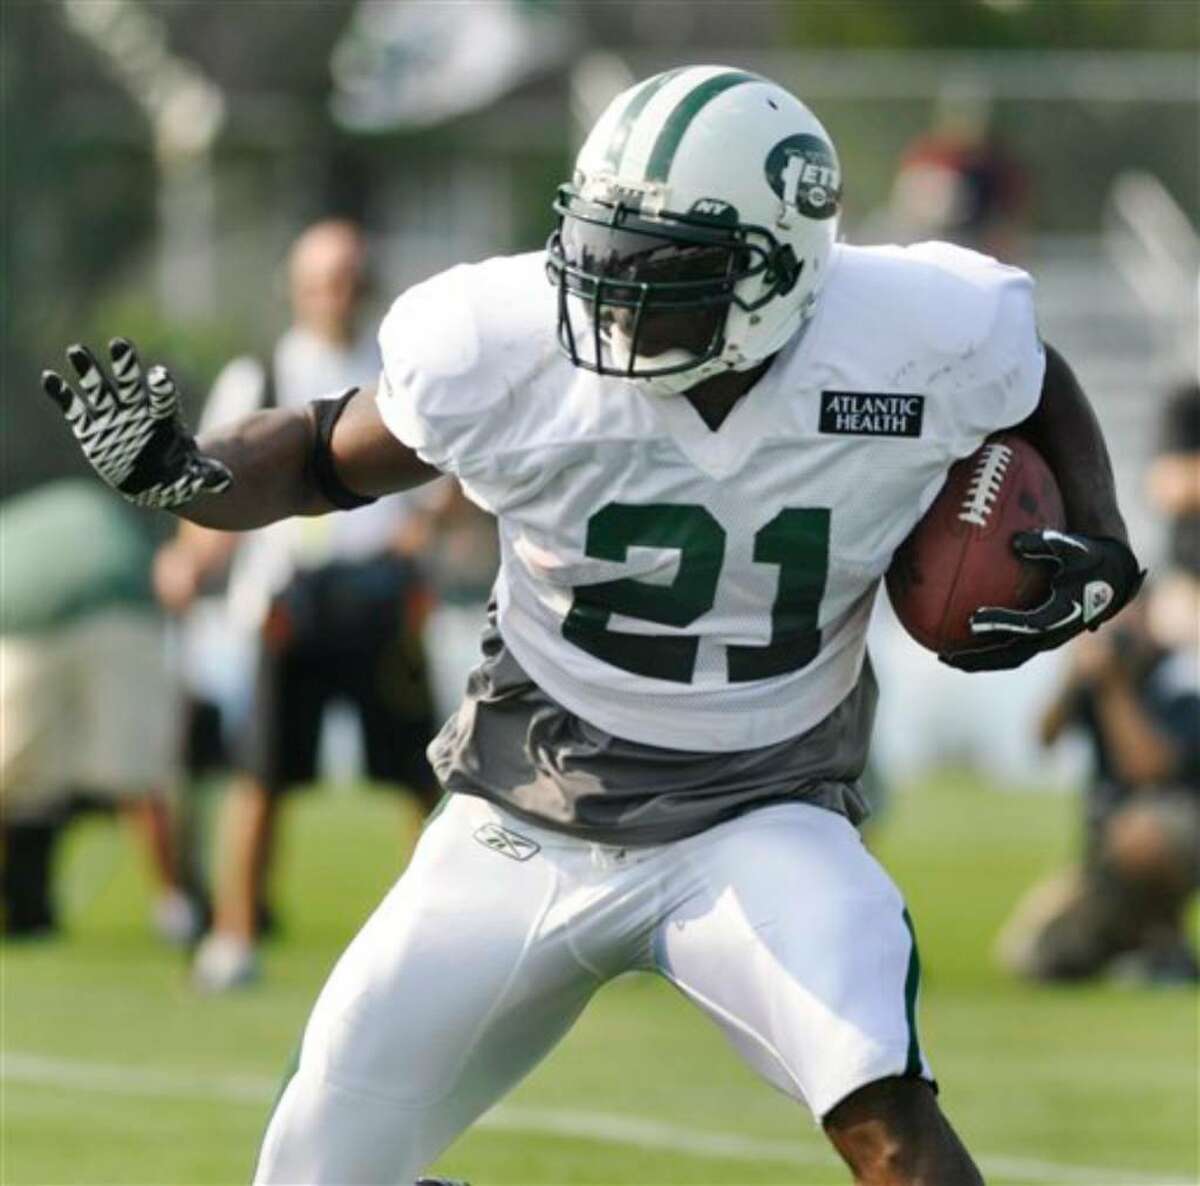 New York Jets running back LaDainian Tomlinson carries the ball during morning practice at the team's NFL football training camp in Cortland, N.Y., Tuesday, Aug. 3, 2010. (AP Photo/Kevin Rivoli)